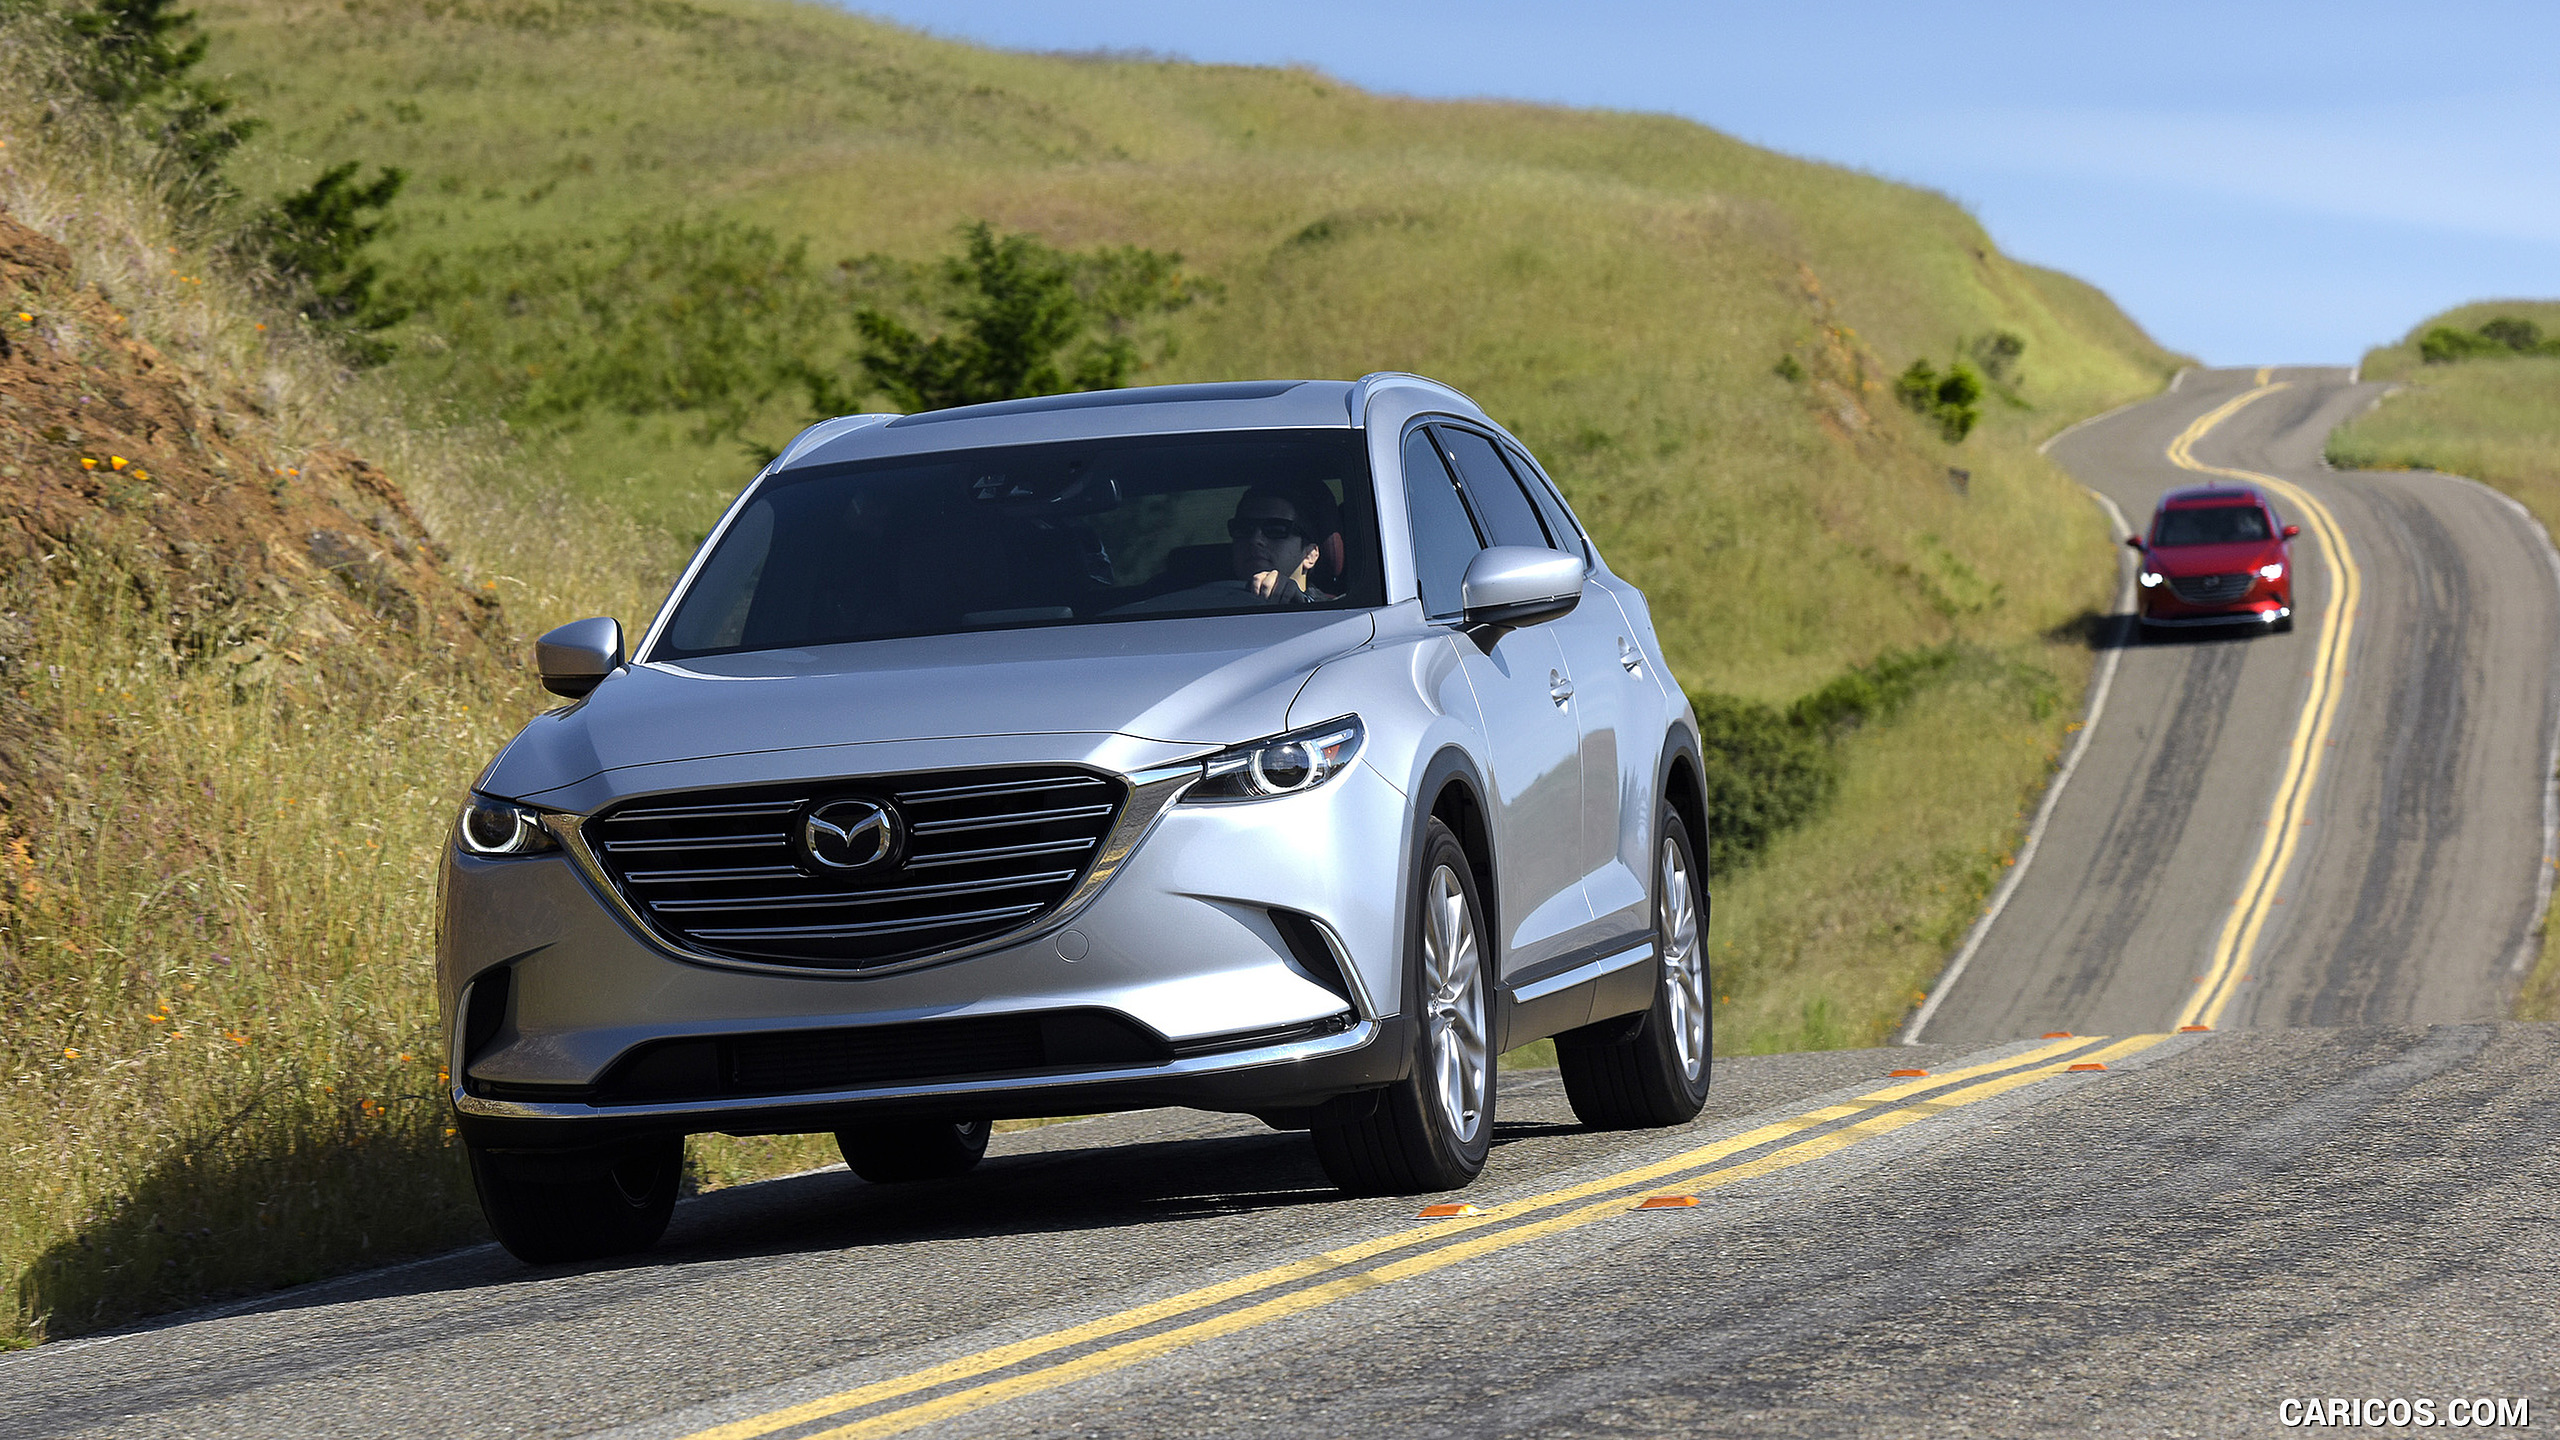 2016 Mazda CX-9 - Front, #37 of 69